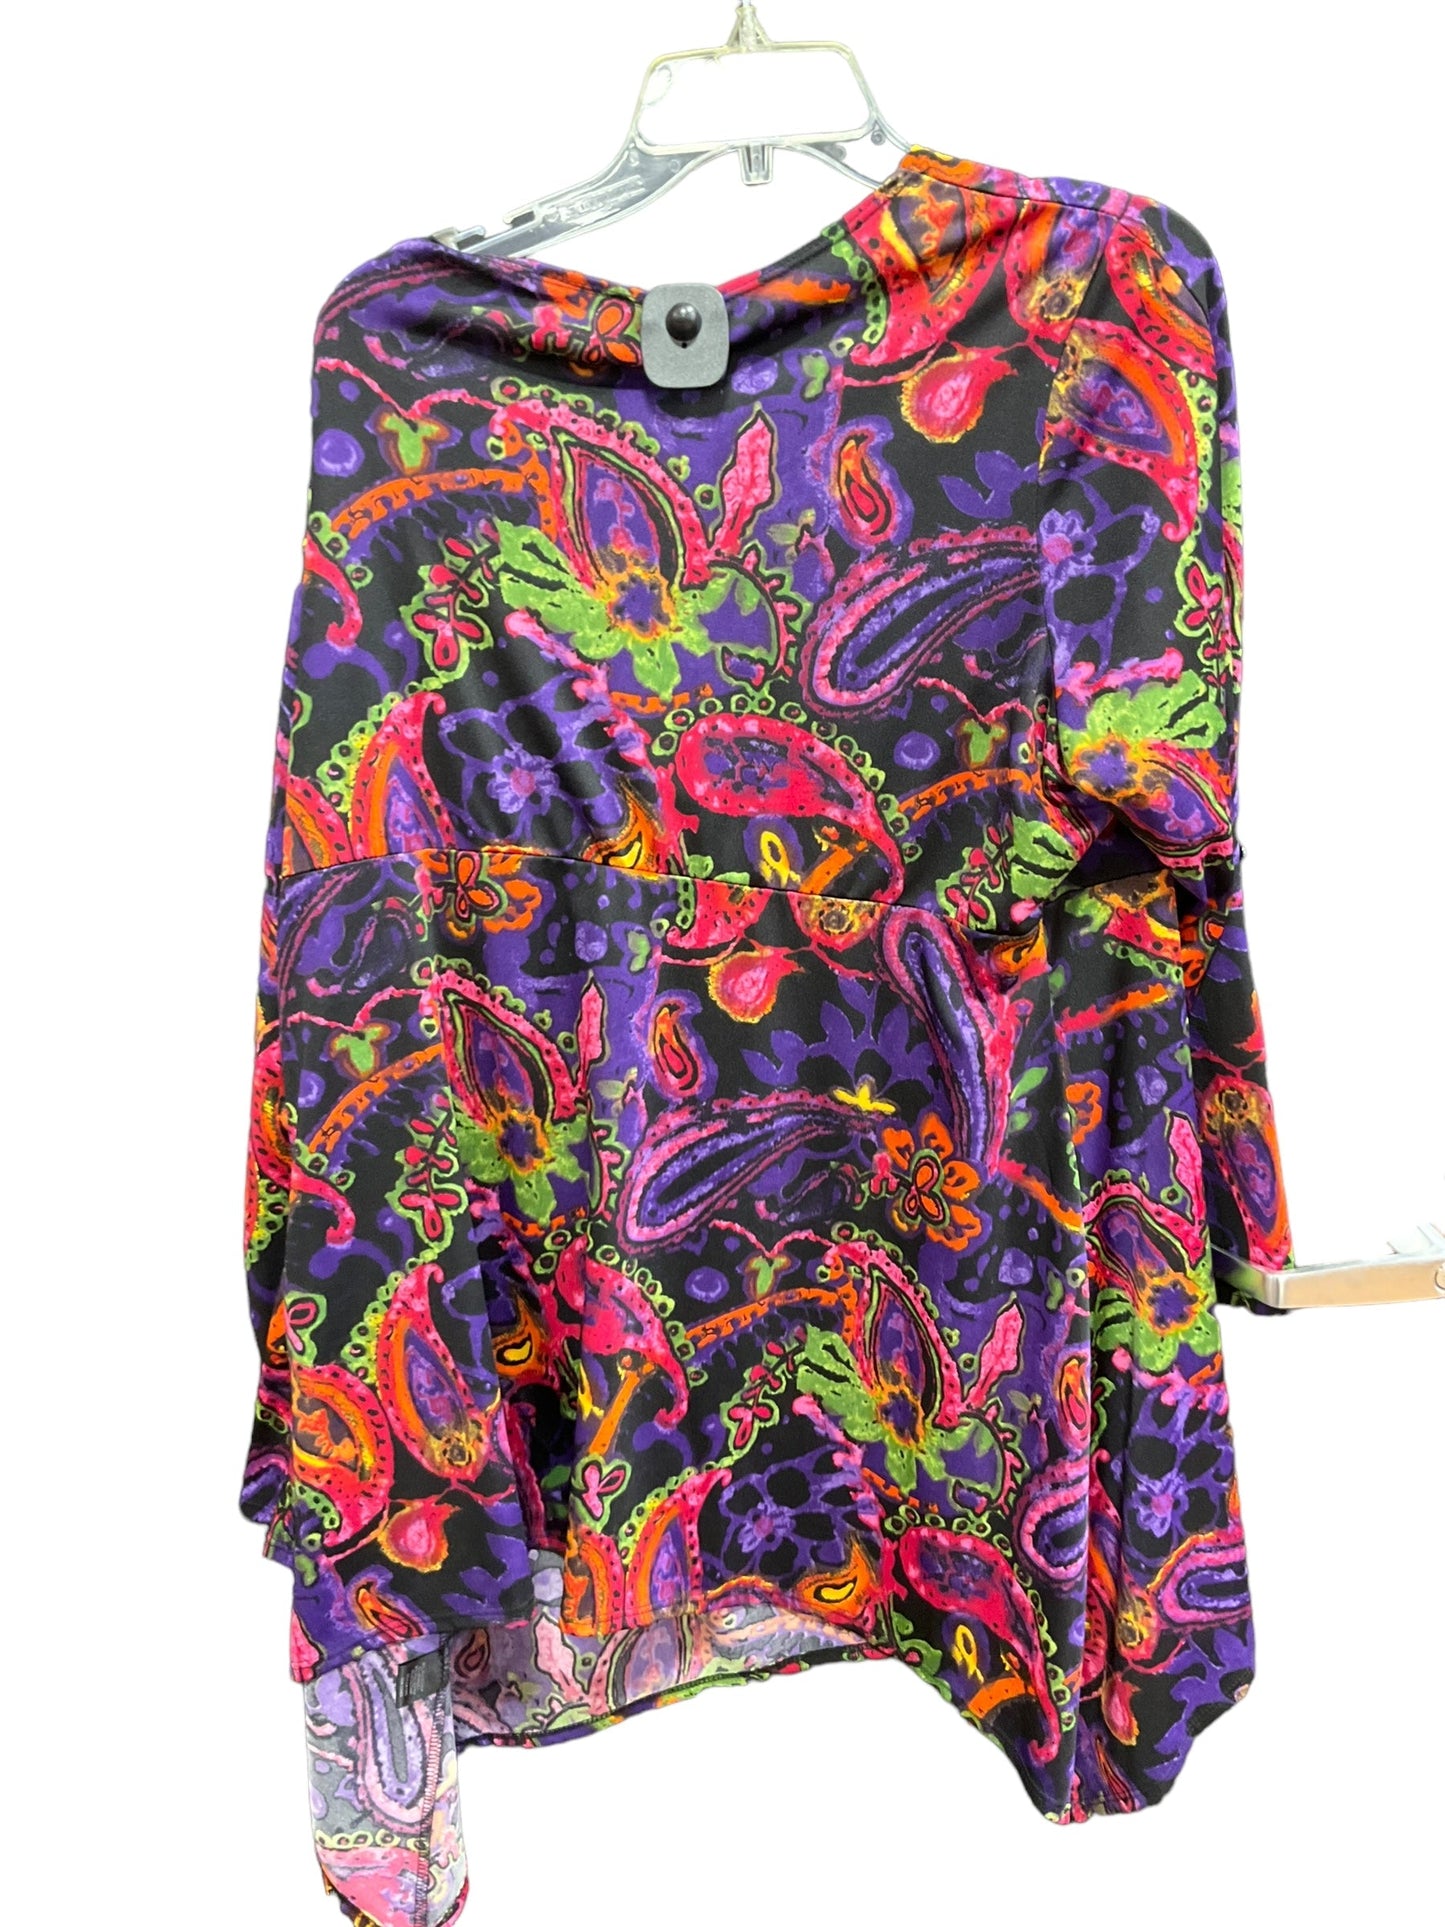 Multi-colored Top Long Sleeve Antthony, Size 2x